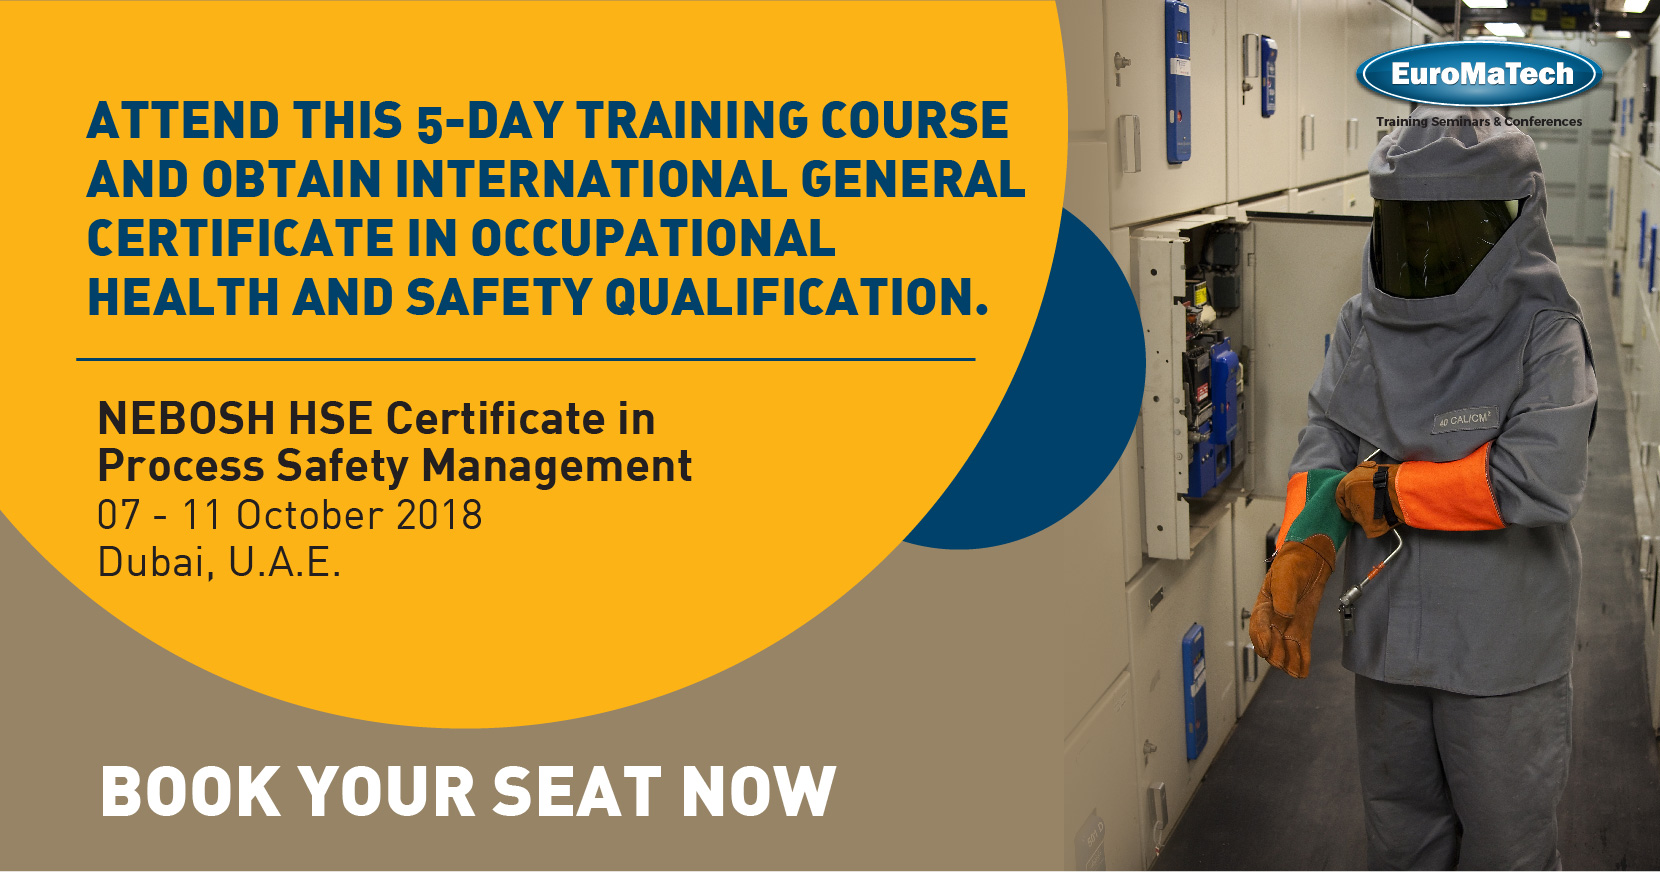 NEBOSH HSE Certificate in Process Safety Management Training Course in Dubai